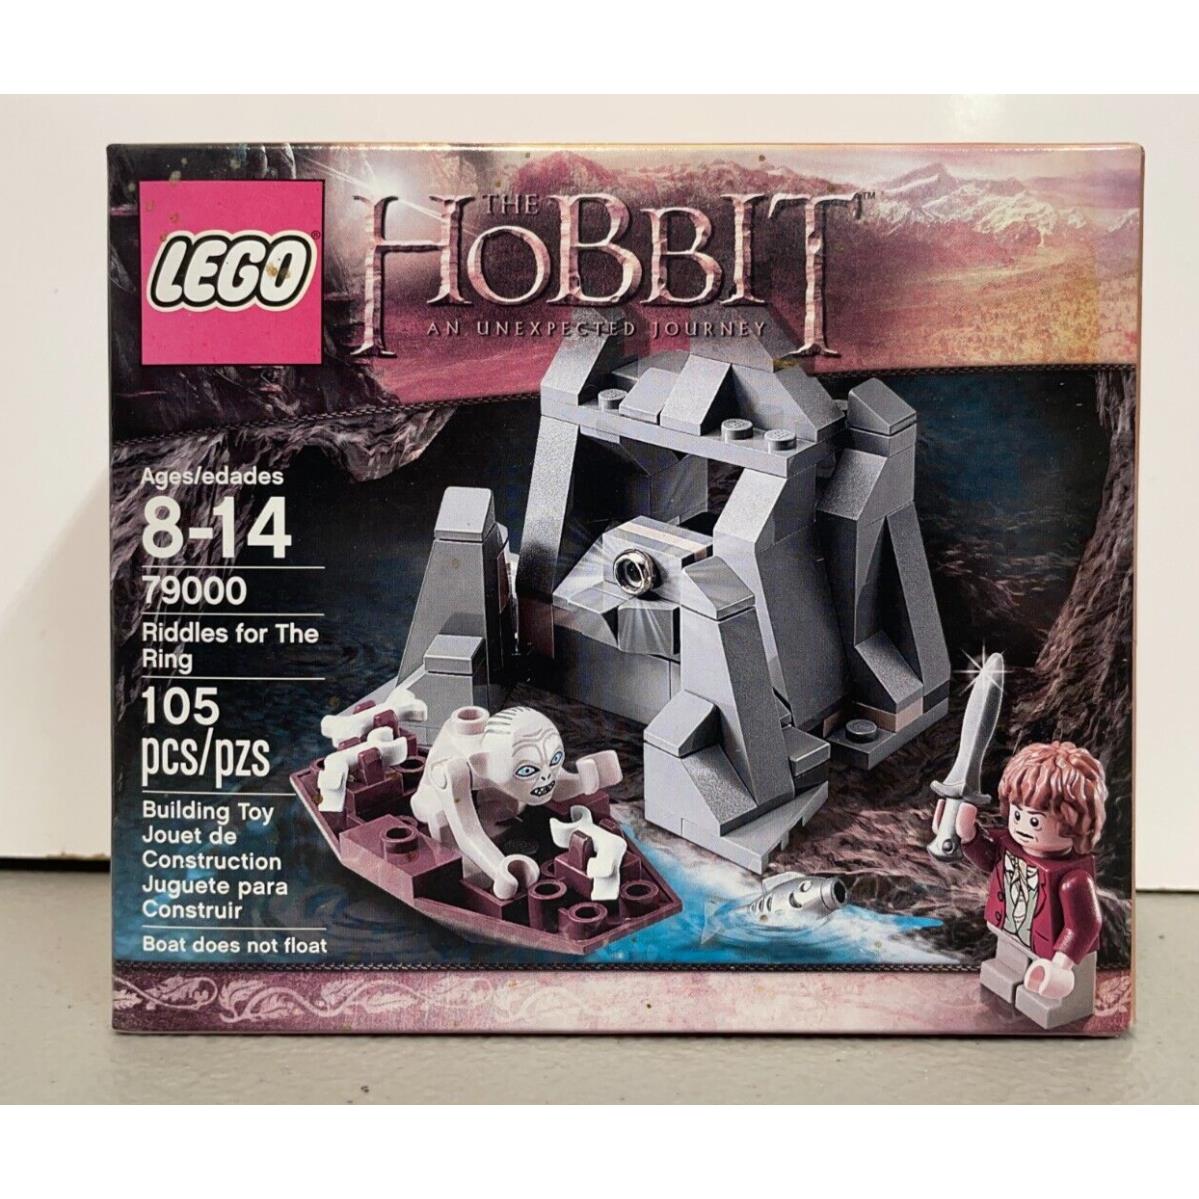 Lego 79000 Riddles For The Ring - The Hobbit Lotr - 105 Pcs 2012 - Faded Box